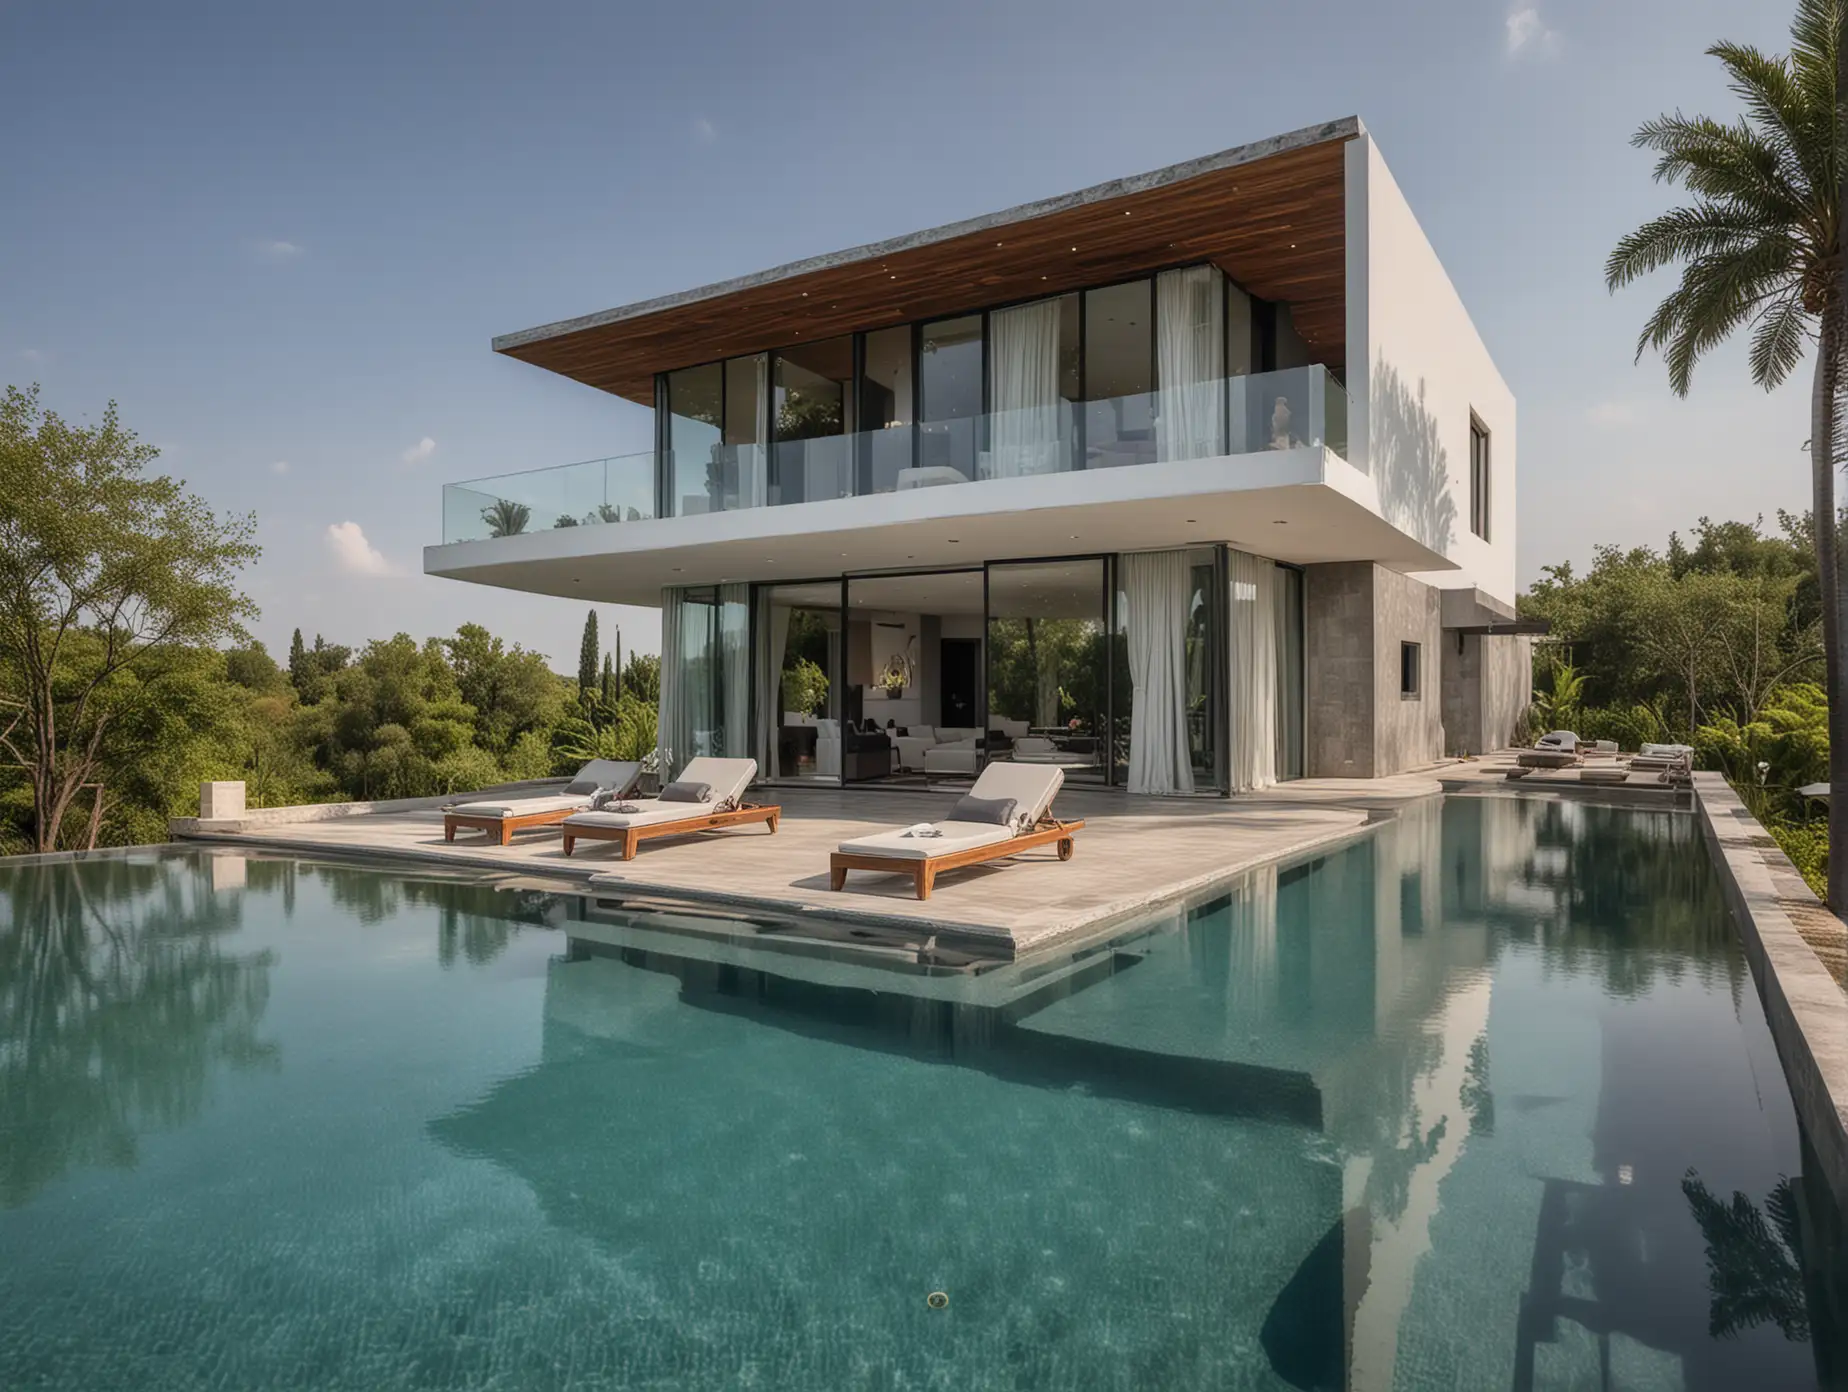 a very beautiful villa with infinity pool. it's design is contemporary minimalist style